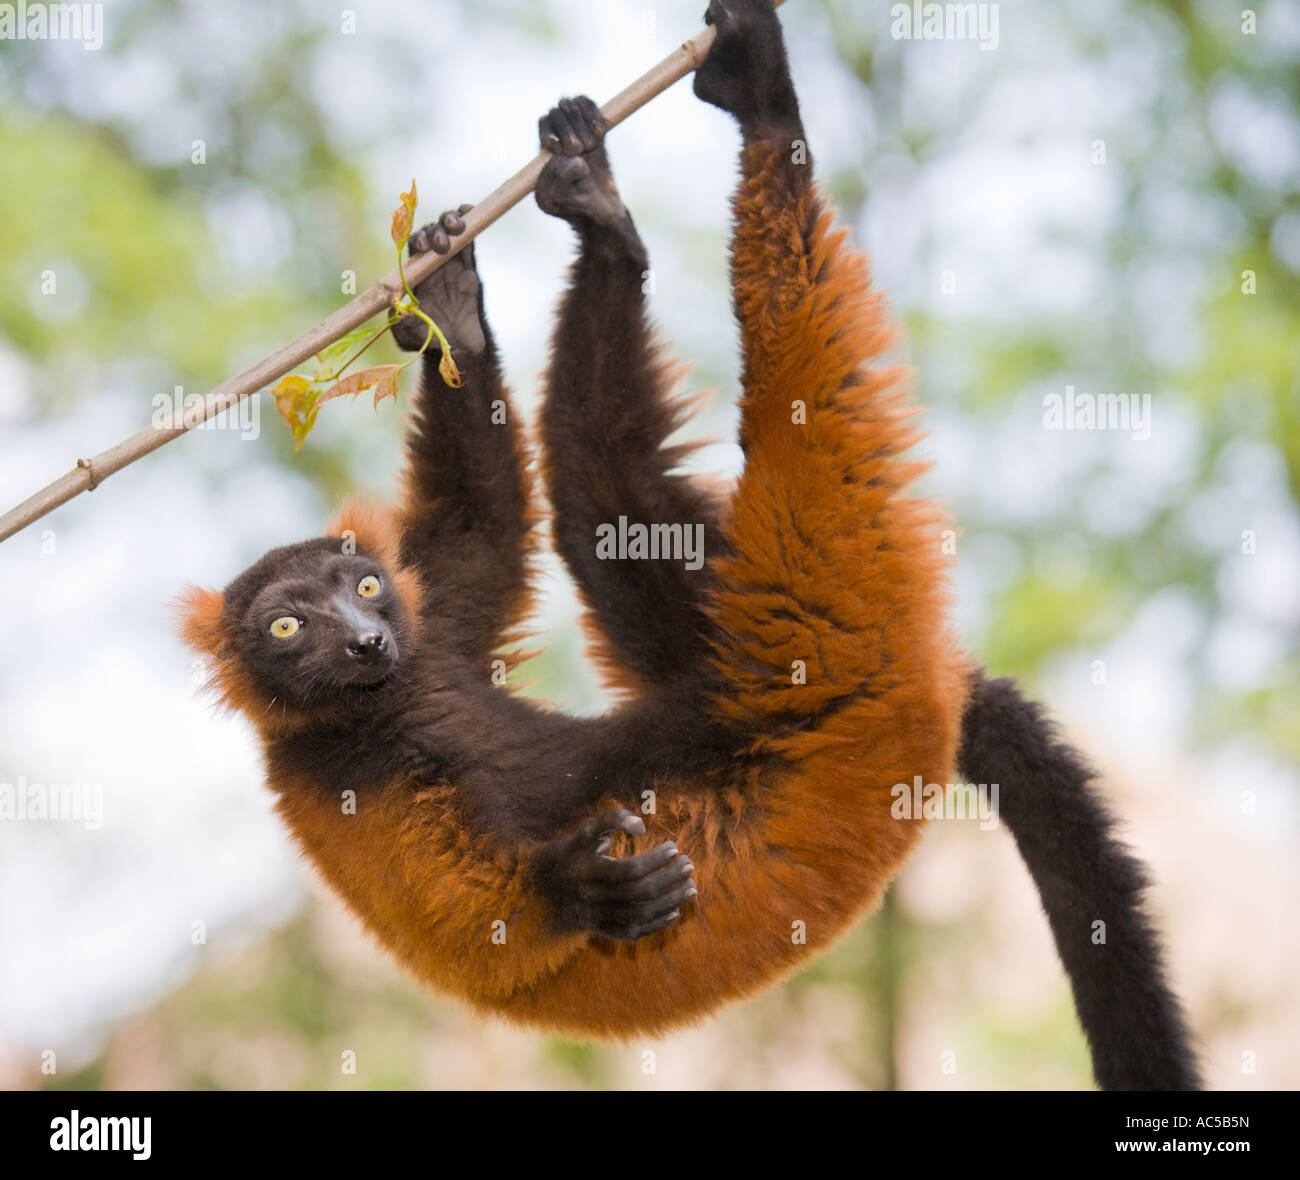 A ruffed lemur (Varecia variegata rubra) scrambling about in the branches of a tree Stock Photo